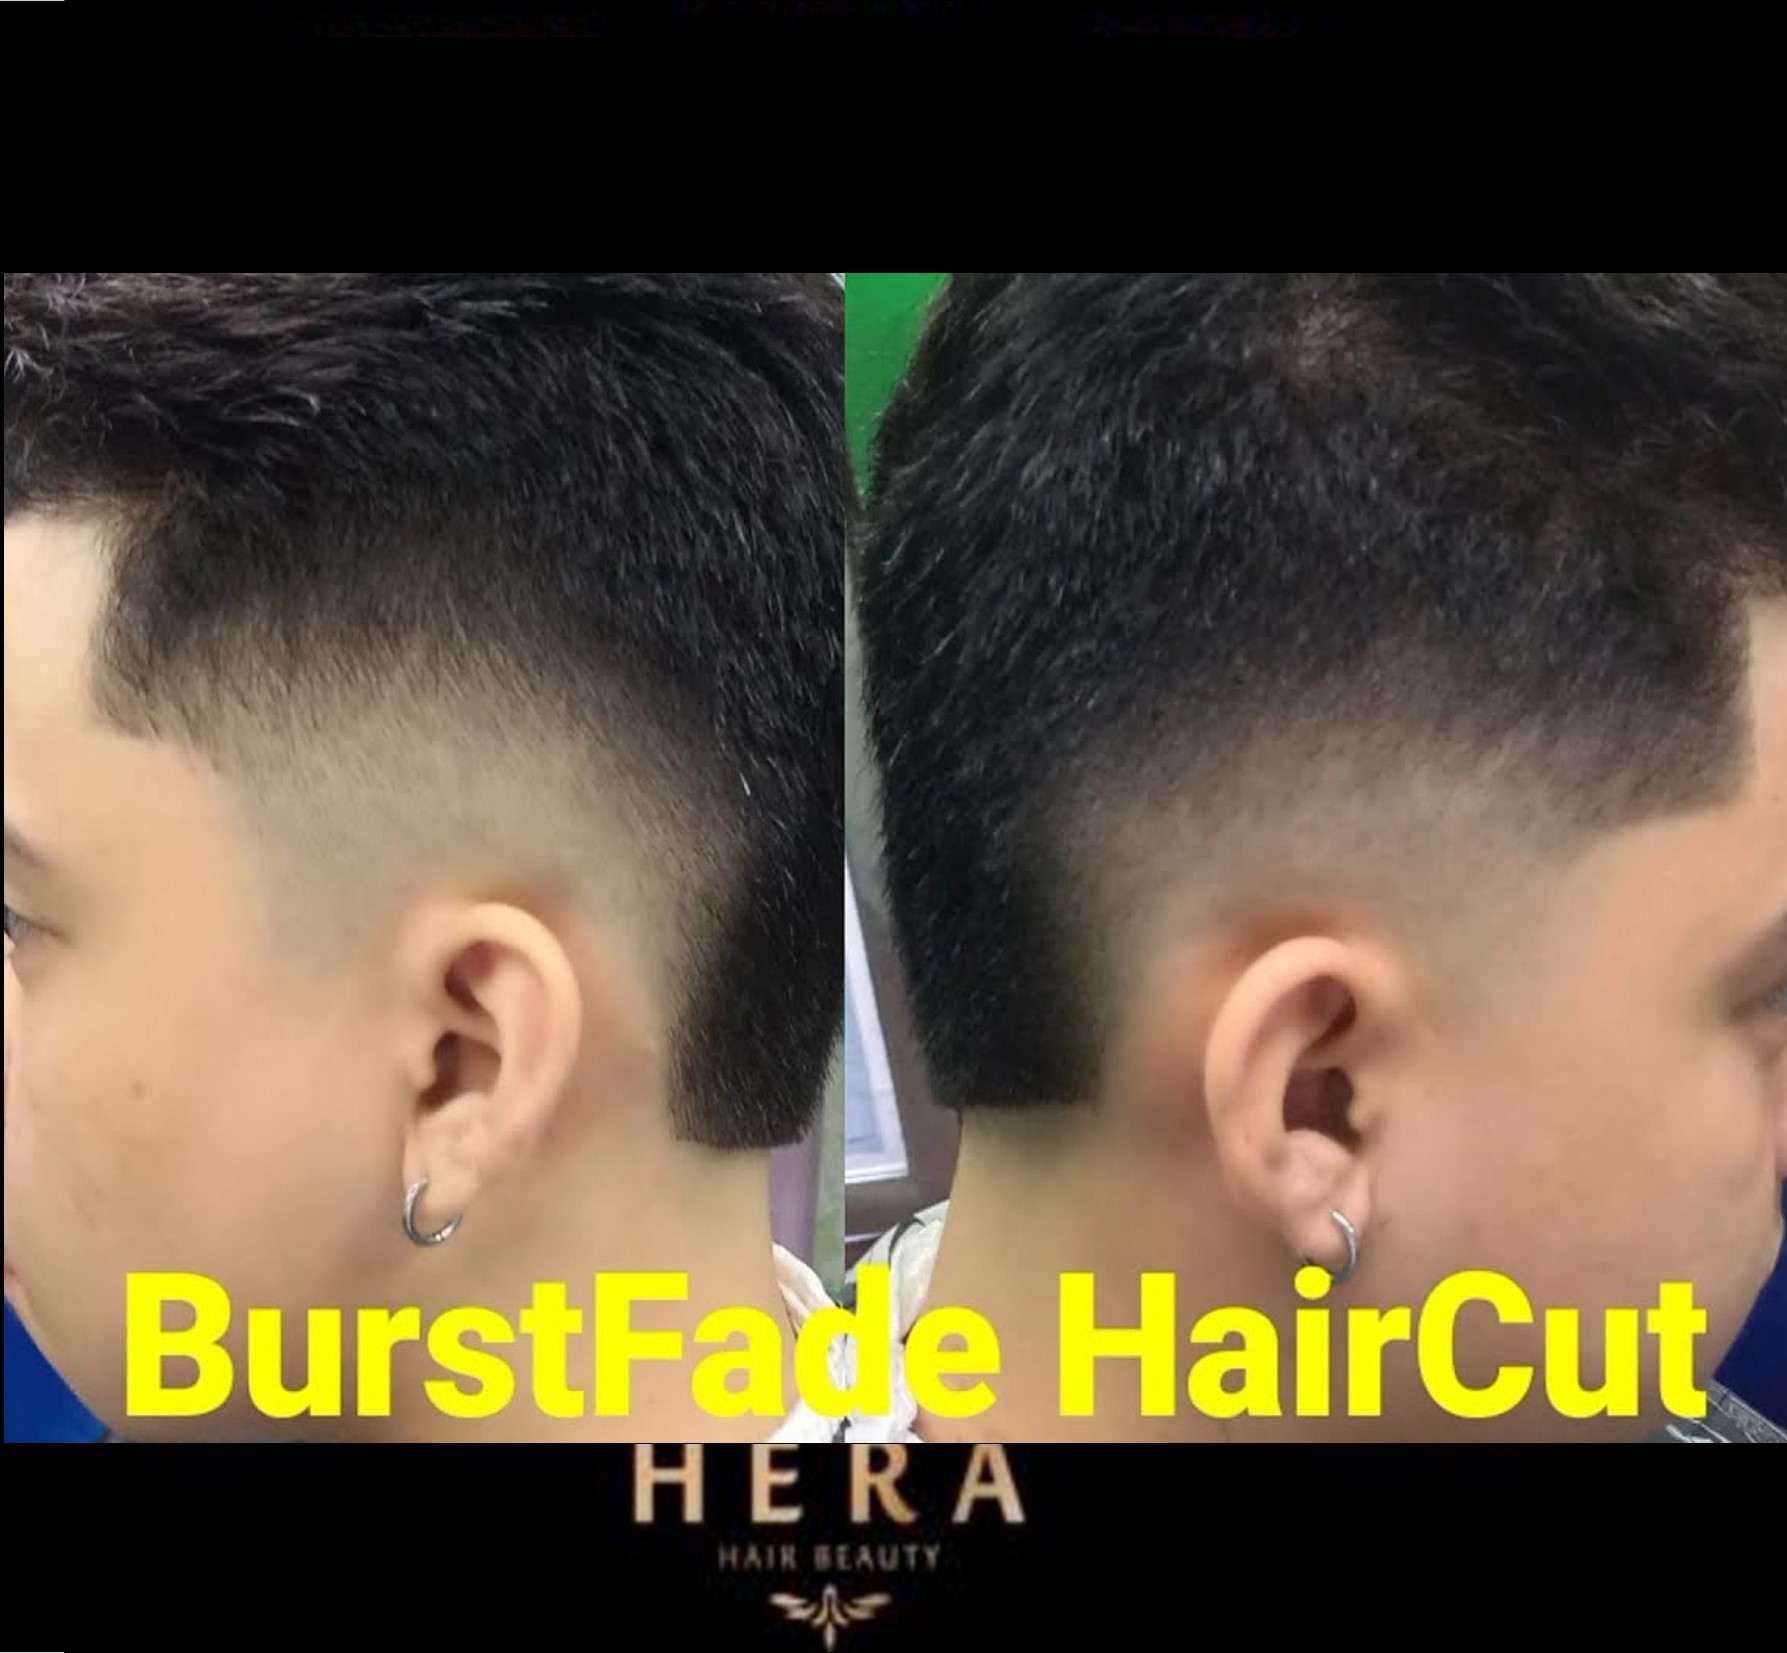 Low Fade vs High Fade Haircuts: 5 Cool Styles